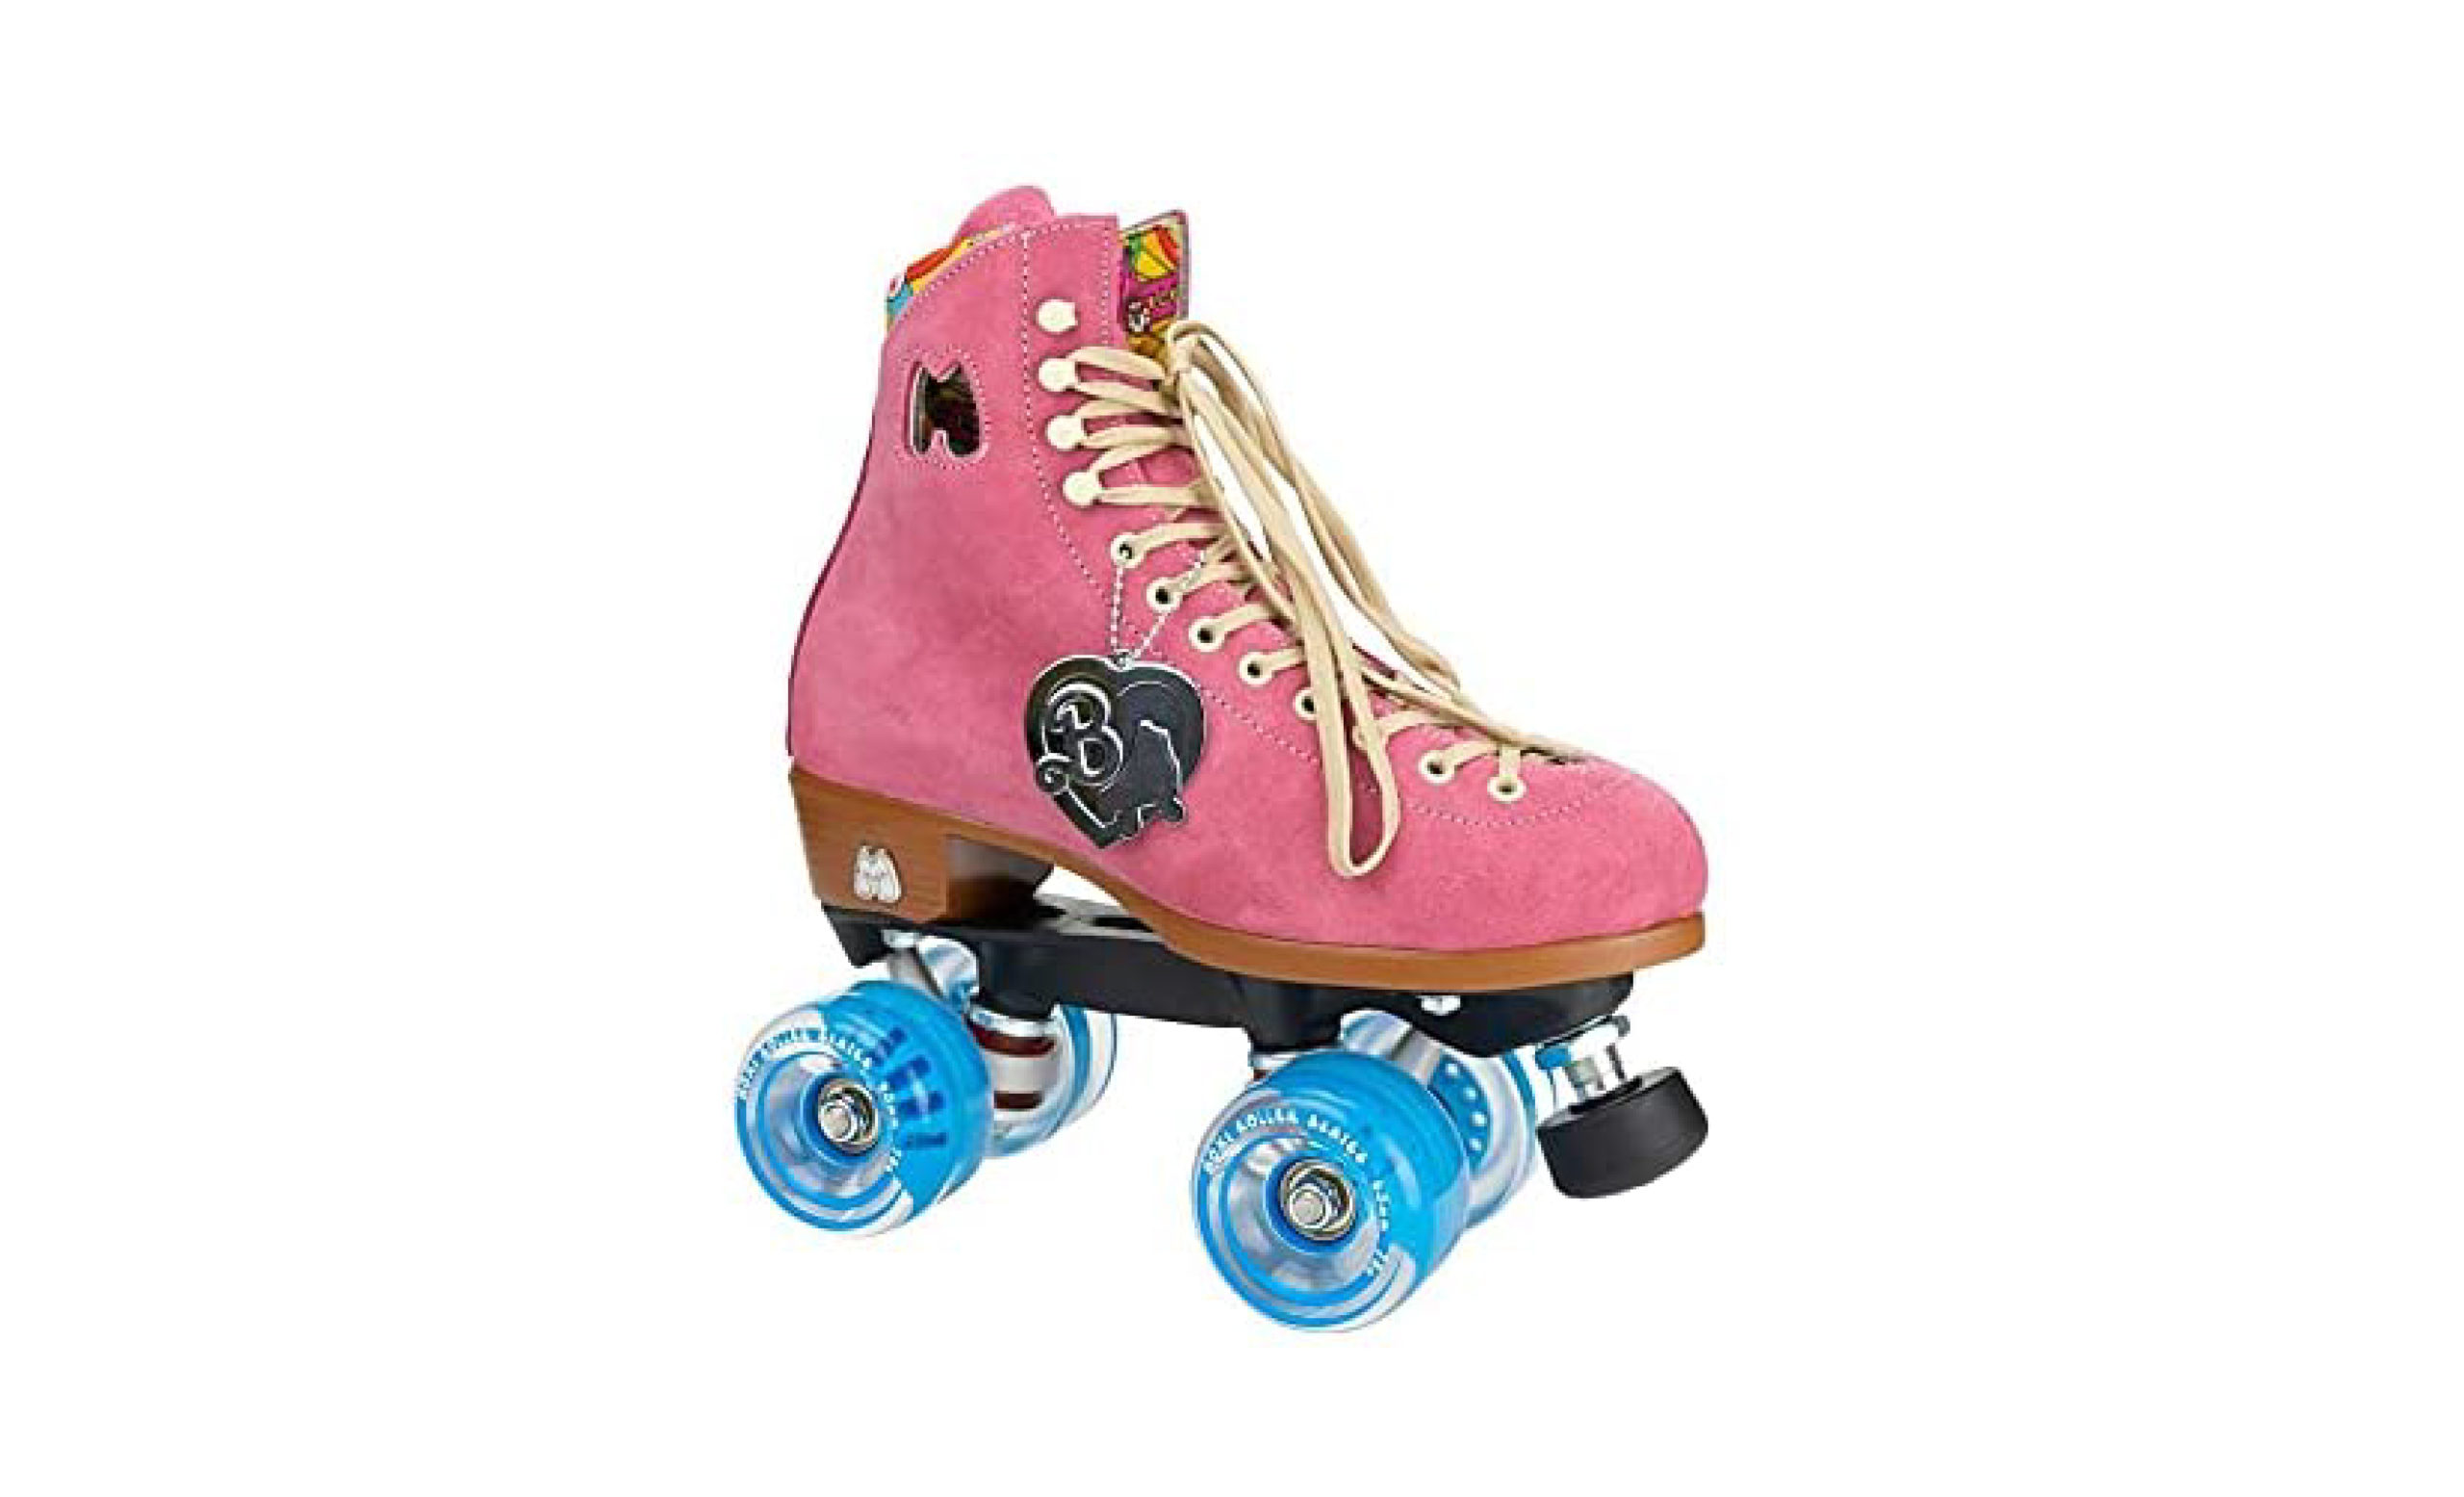 Top 5 Best Moxi Skates For Sale In 2021